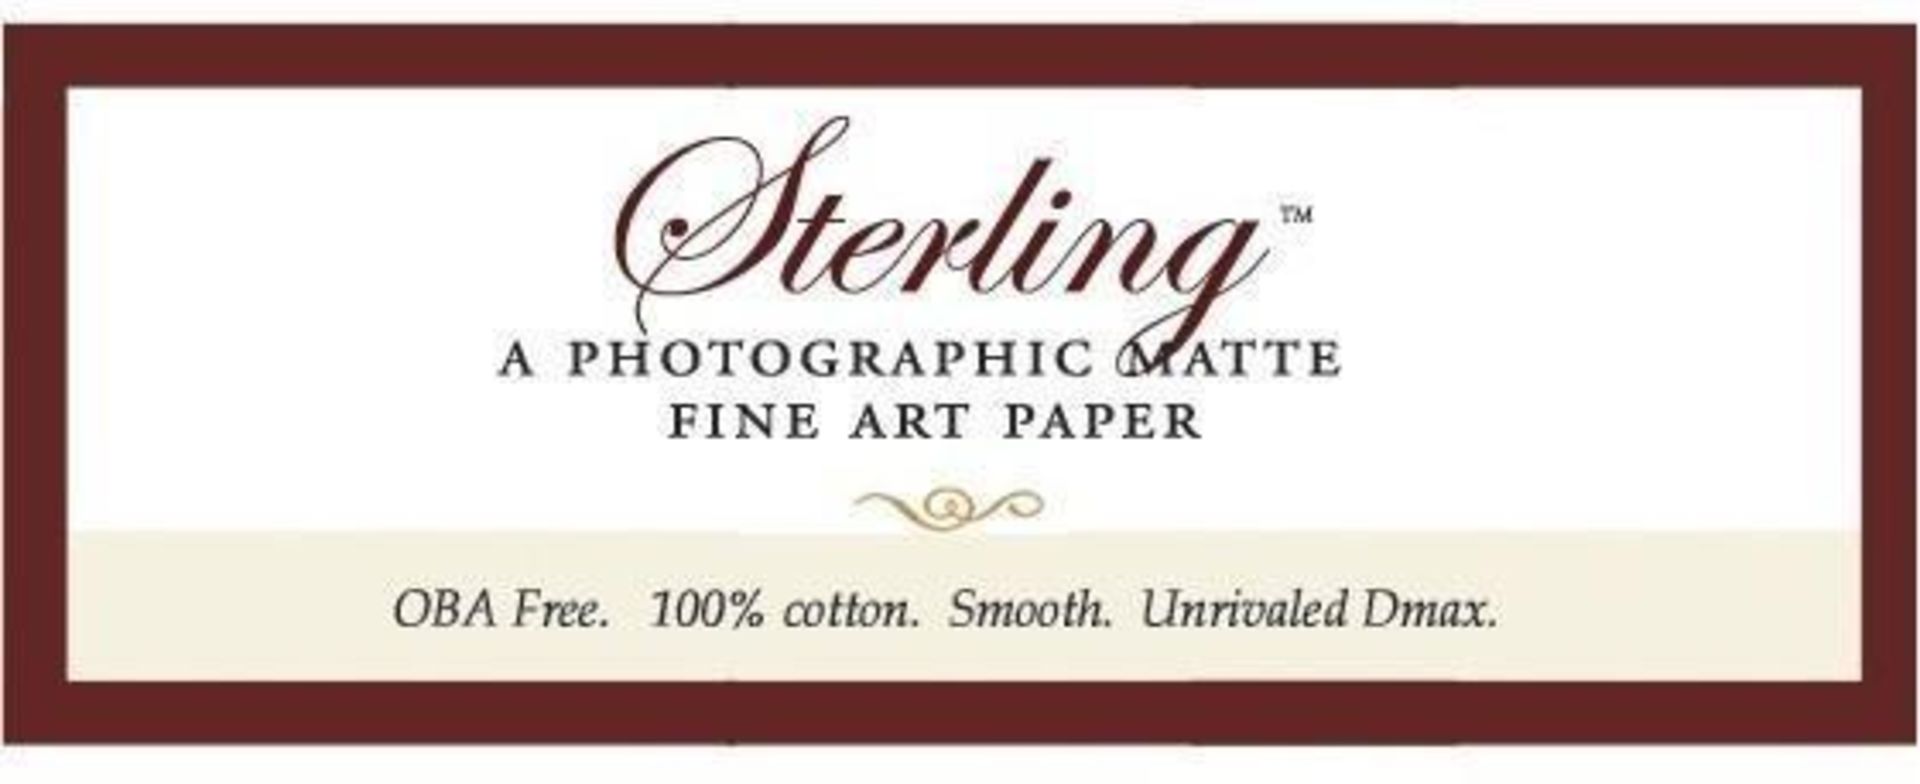 5 x Rolls of Breathing Colour STERLING Photographic Matte Fine Art Paper - Size 24" x 40' - 205gsm - - Image 5 of 5